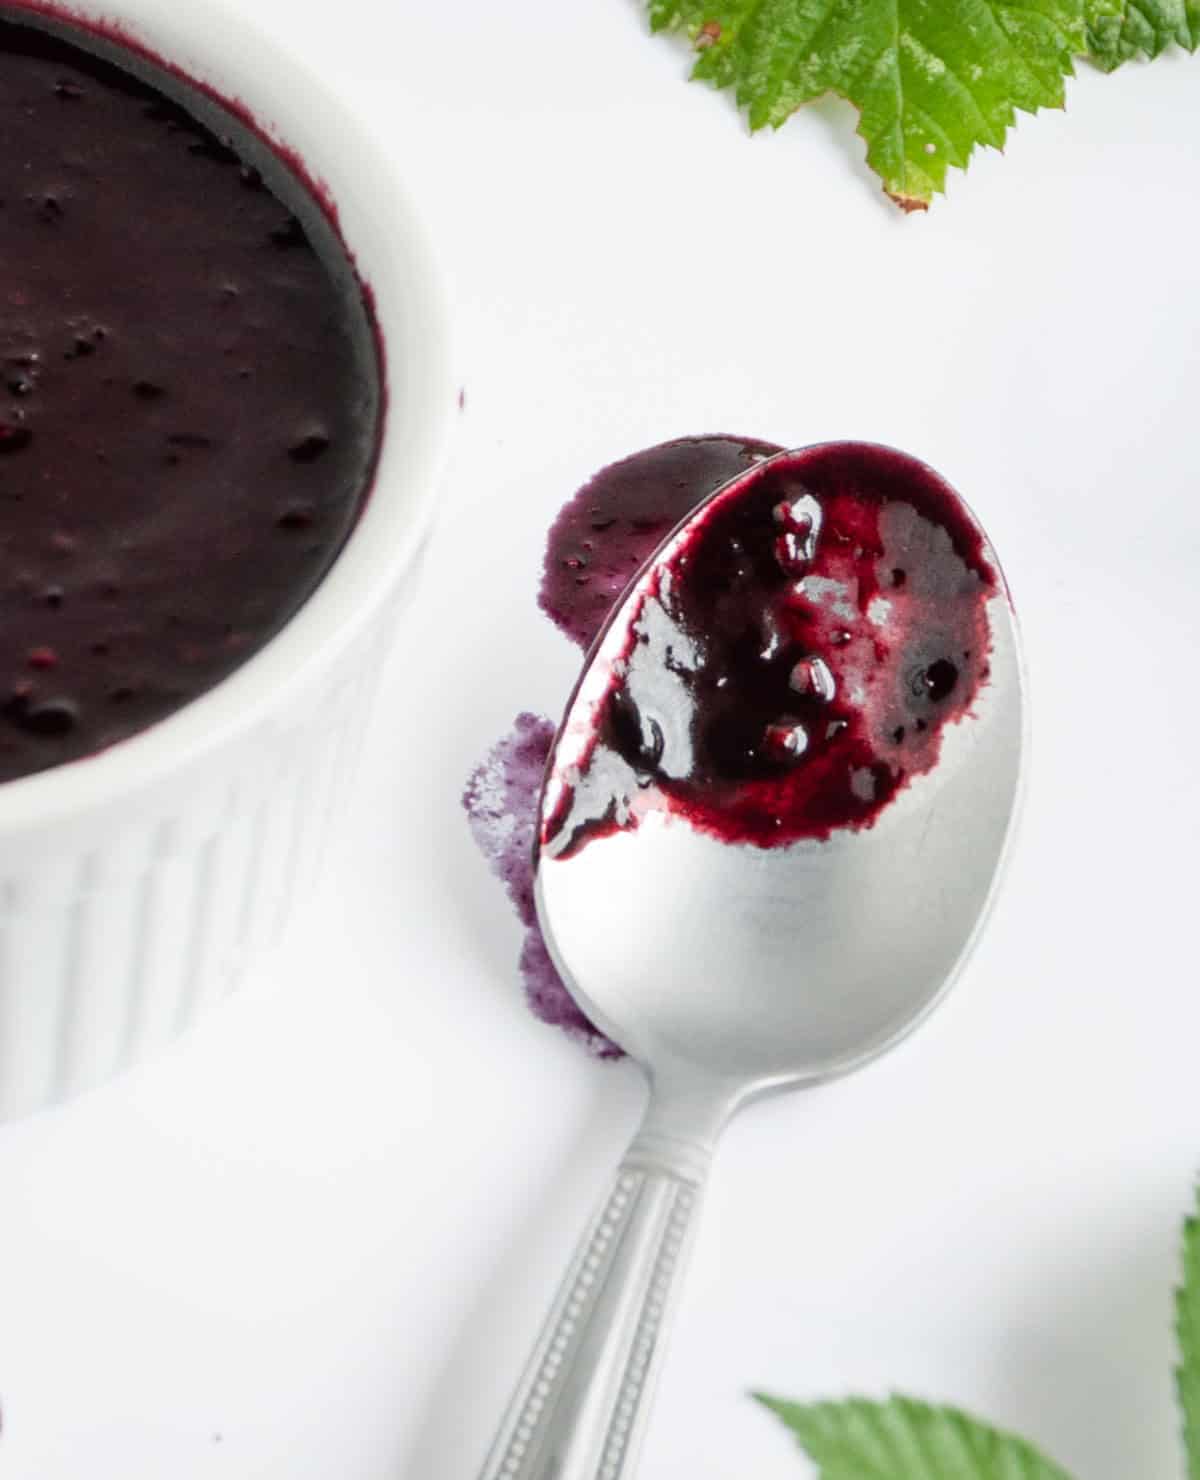 Close up of a spoon with blackberry salad dressing on it next to a larger container and leaves